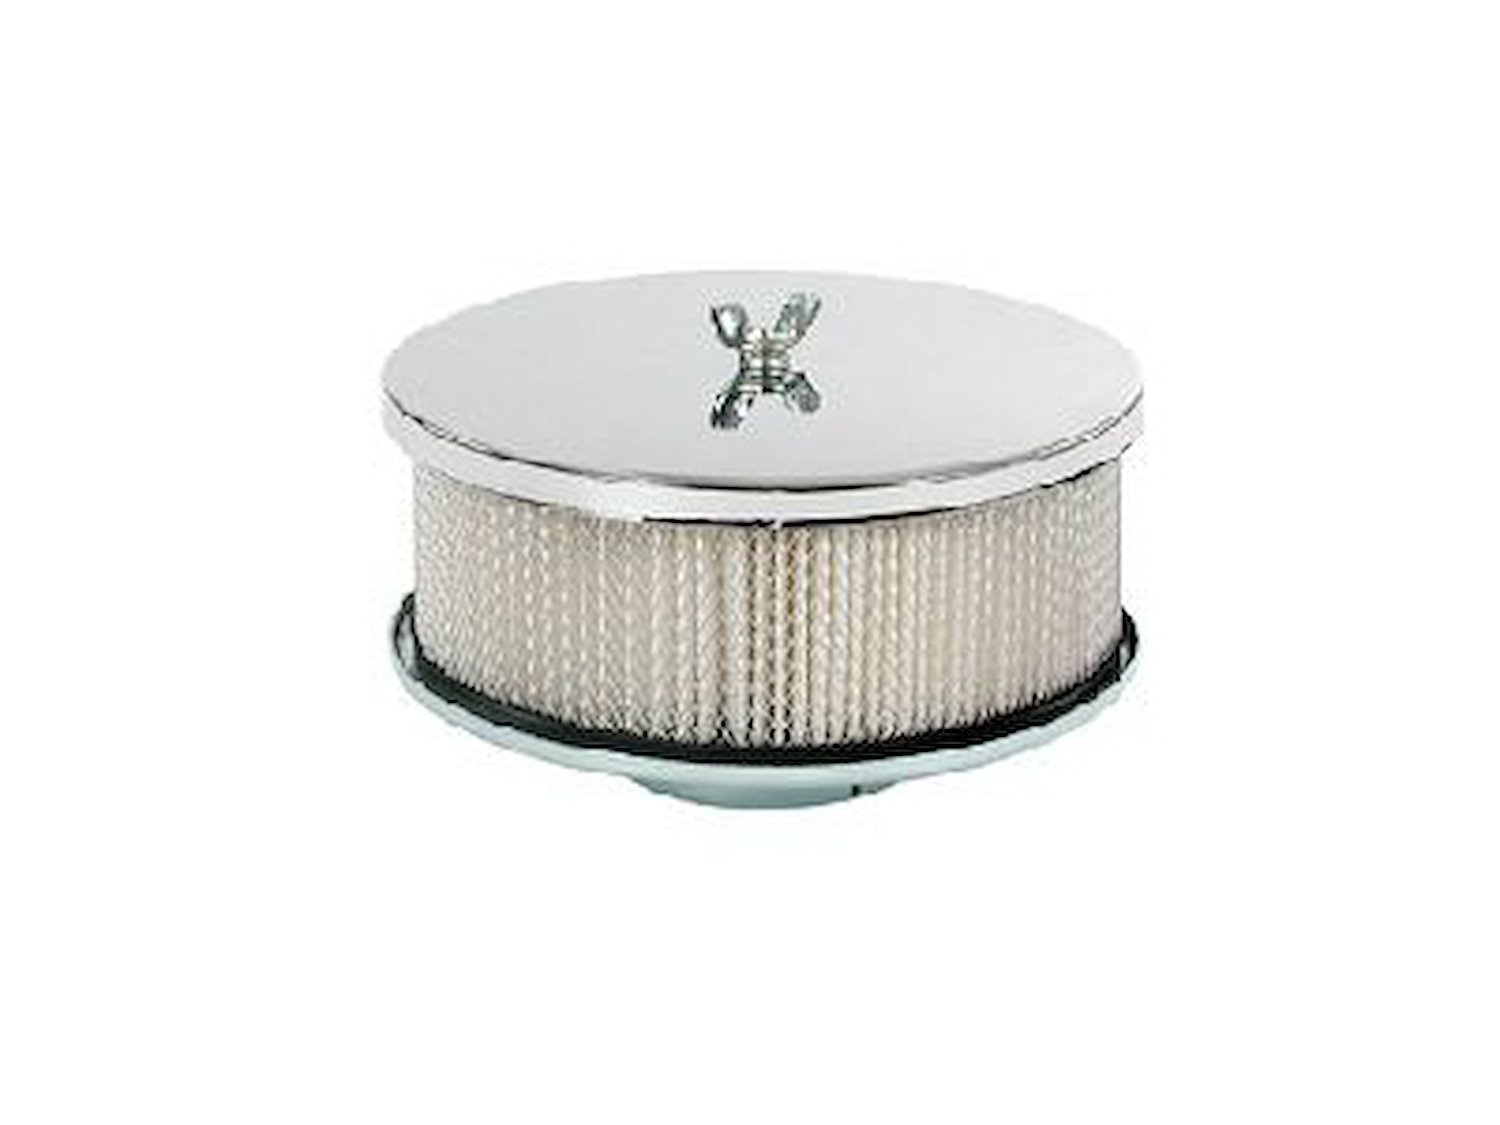 Chrome-Plated Easy-Flow Air Cleaner 6-1/2" Diameter